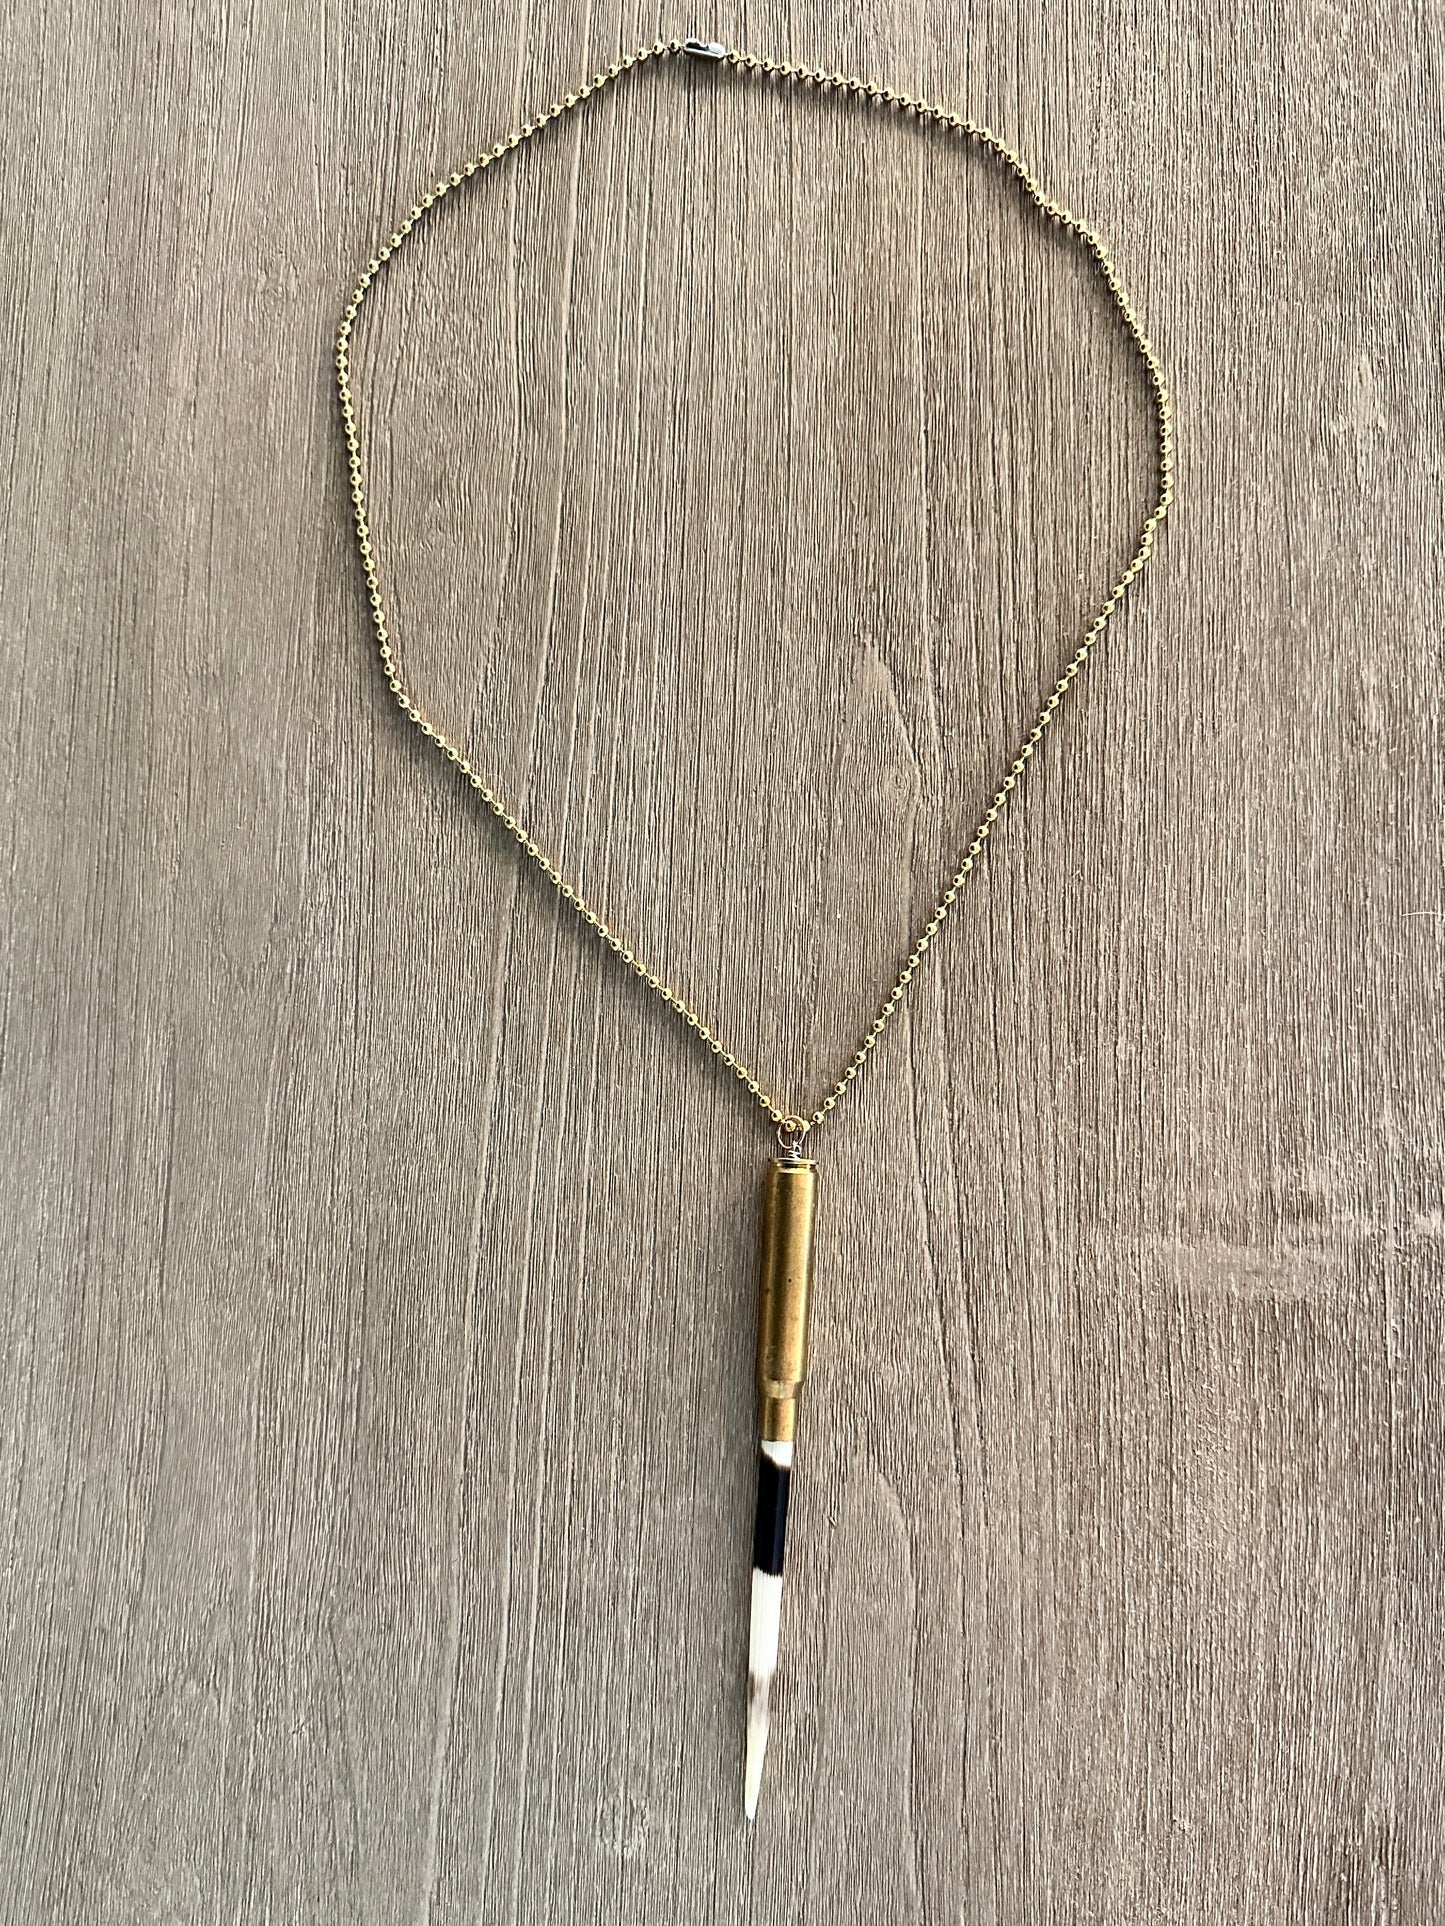 Yellowstone Beth Dutton Quill in Brass Necklace